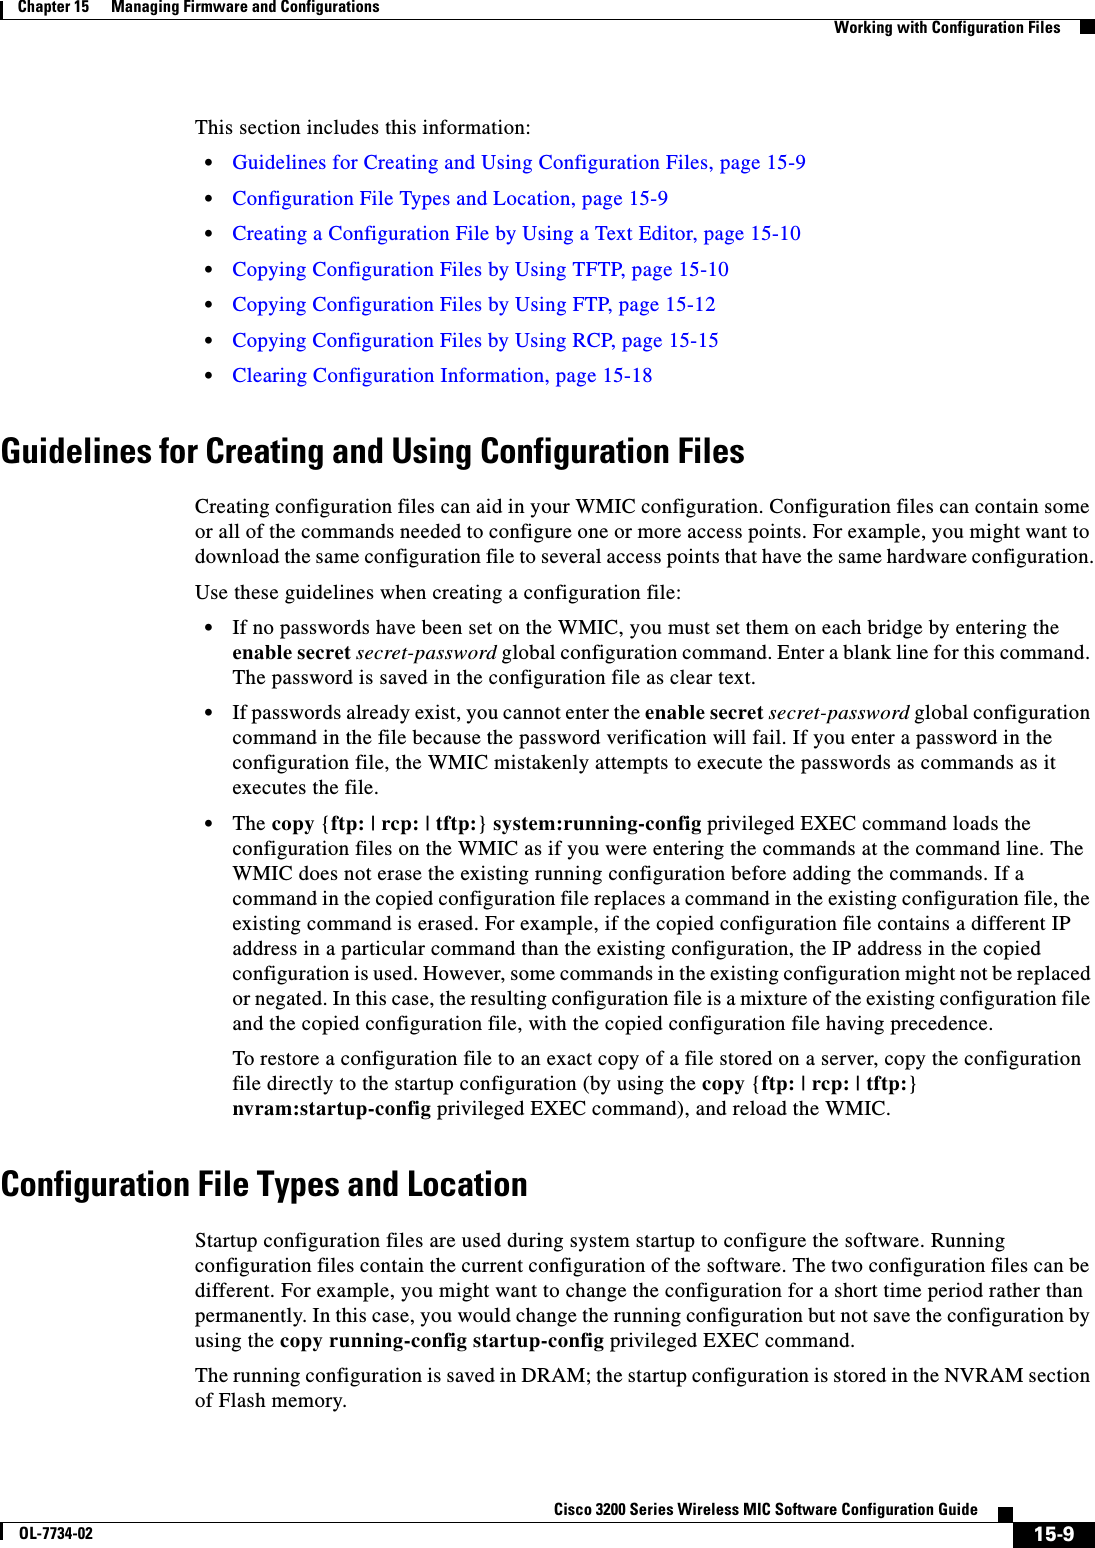 15-9Cisco 3200 Series Wireless MIC Software Configuration GuideOL-7734-02Chapter 15      Managing Firmware and ConfigurationsWorking with Configuration FilesThis section includes this information:•Guidelines for Creating and Using Configuration Files, page 15-9•Configuration File Types and Location, page 15-9•Creating a Configuration File by Using a Text Editor, page 15-10•Copying Configuration Files by Using TFTP, page 15-10•Copying Configuration Files by Using FTP, page 15-12•Copying Configuration Files by Using RCP, page 15-15•Clearing Configuration Information, page 15-18Guidelines for Creating and Using Configuration FilesCreating configuration files can aid in your WMIC configuration. Configuration files can contain some or all of the commands needed to configure one or more access points. For example, you might want to download the same configuration file to several access points that have the same hardware configuration.Use these guidelines when creating a configuration file:•If no passwords have been set on the WMIC, you must set them on each bridge by entering the enable secret secret-password global configuration command. Enter a blank line for this command. The password is saved in the configuration file as clear text.•If passwords already exist, you cannot enter the enable secret secret-password global configuration command in the file because the password verification will fail. If you enter a password in the configuration file, the WMIC mistakenly attempts to execute the passwords as commands as it executes the file.•The copy {ftp: | rcp: | tftp:}system:running-config privileged EXEC command loads the configuration files on the WMIC as if you were entering the commands at the command line. The WMIC does not erase the existing running configuration before adding the commands. If a command in the copied configuration file replaces a command in the existing configuration file, the existing command is erased. For example, if the copied configuration file contains a different IP address in a particular command than the existing configuration, the IP address in the copied configuration is used. However, some commands in the existing configuration might not be replaced or negated. In this case, the resulting configuration file is a mixture of the existing configuration file and the copied configuration file, with the copied configuration file having precedence. To restore a configuration file to an exact copy of a file stored on a server, copy the configuration file directly to the startup configuration (by using the copy {ftp: | rcp: | tftp:}nvram:startup-config privileged EXEC command), and reload the WMIC.Configuration File Types and LocationStartup configuration files are used during system startup to configure the software. Running configuration files contain the current configuration of the software. The two configuration files can be different. For example, you might want to change the configuration for a short time period rather than permanently. In this case, you would change the running configuration but not save the configuration by using the copy running-config startup-config privileged EXEC command.The running configuration is saved in DRAM; the startup configuration is stored in the NVRAM section of Flash memory. 